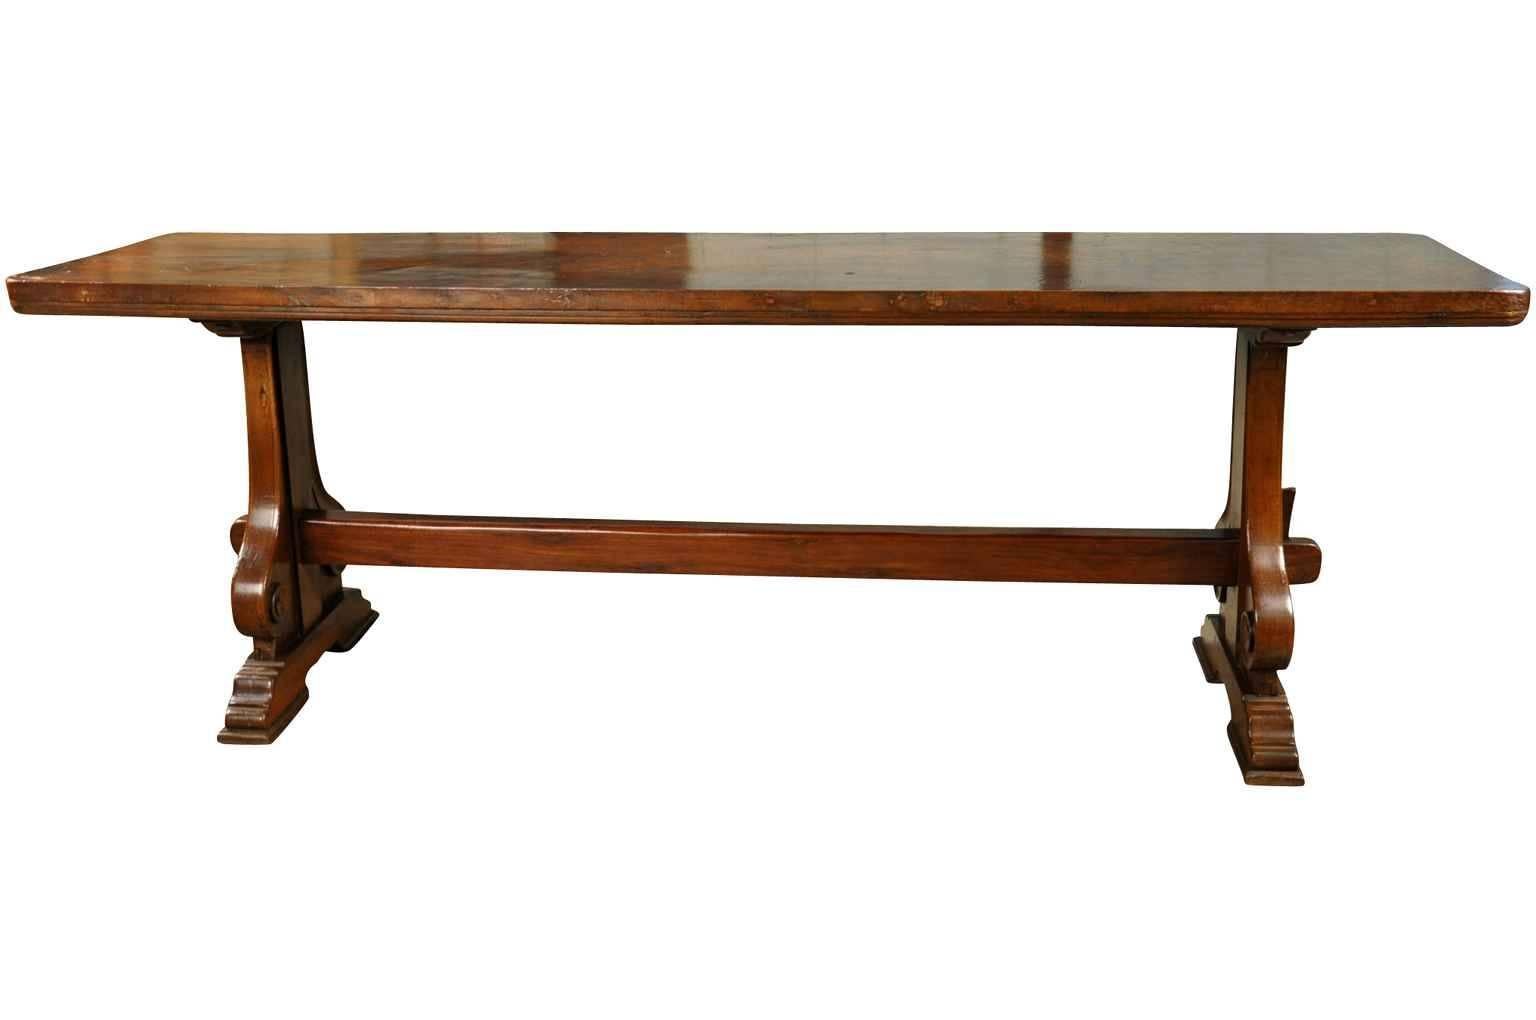 A very striking mid-19th century console from Northern Italy. Beautifully constructed with the top being a solid walnut board. Fabulous patina and graining, rich and luminous. Wonderful not only as a console, but serves beautifully as a sofa table